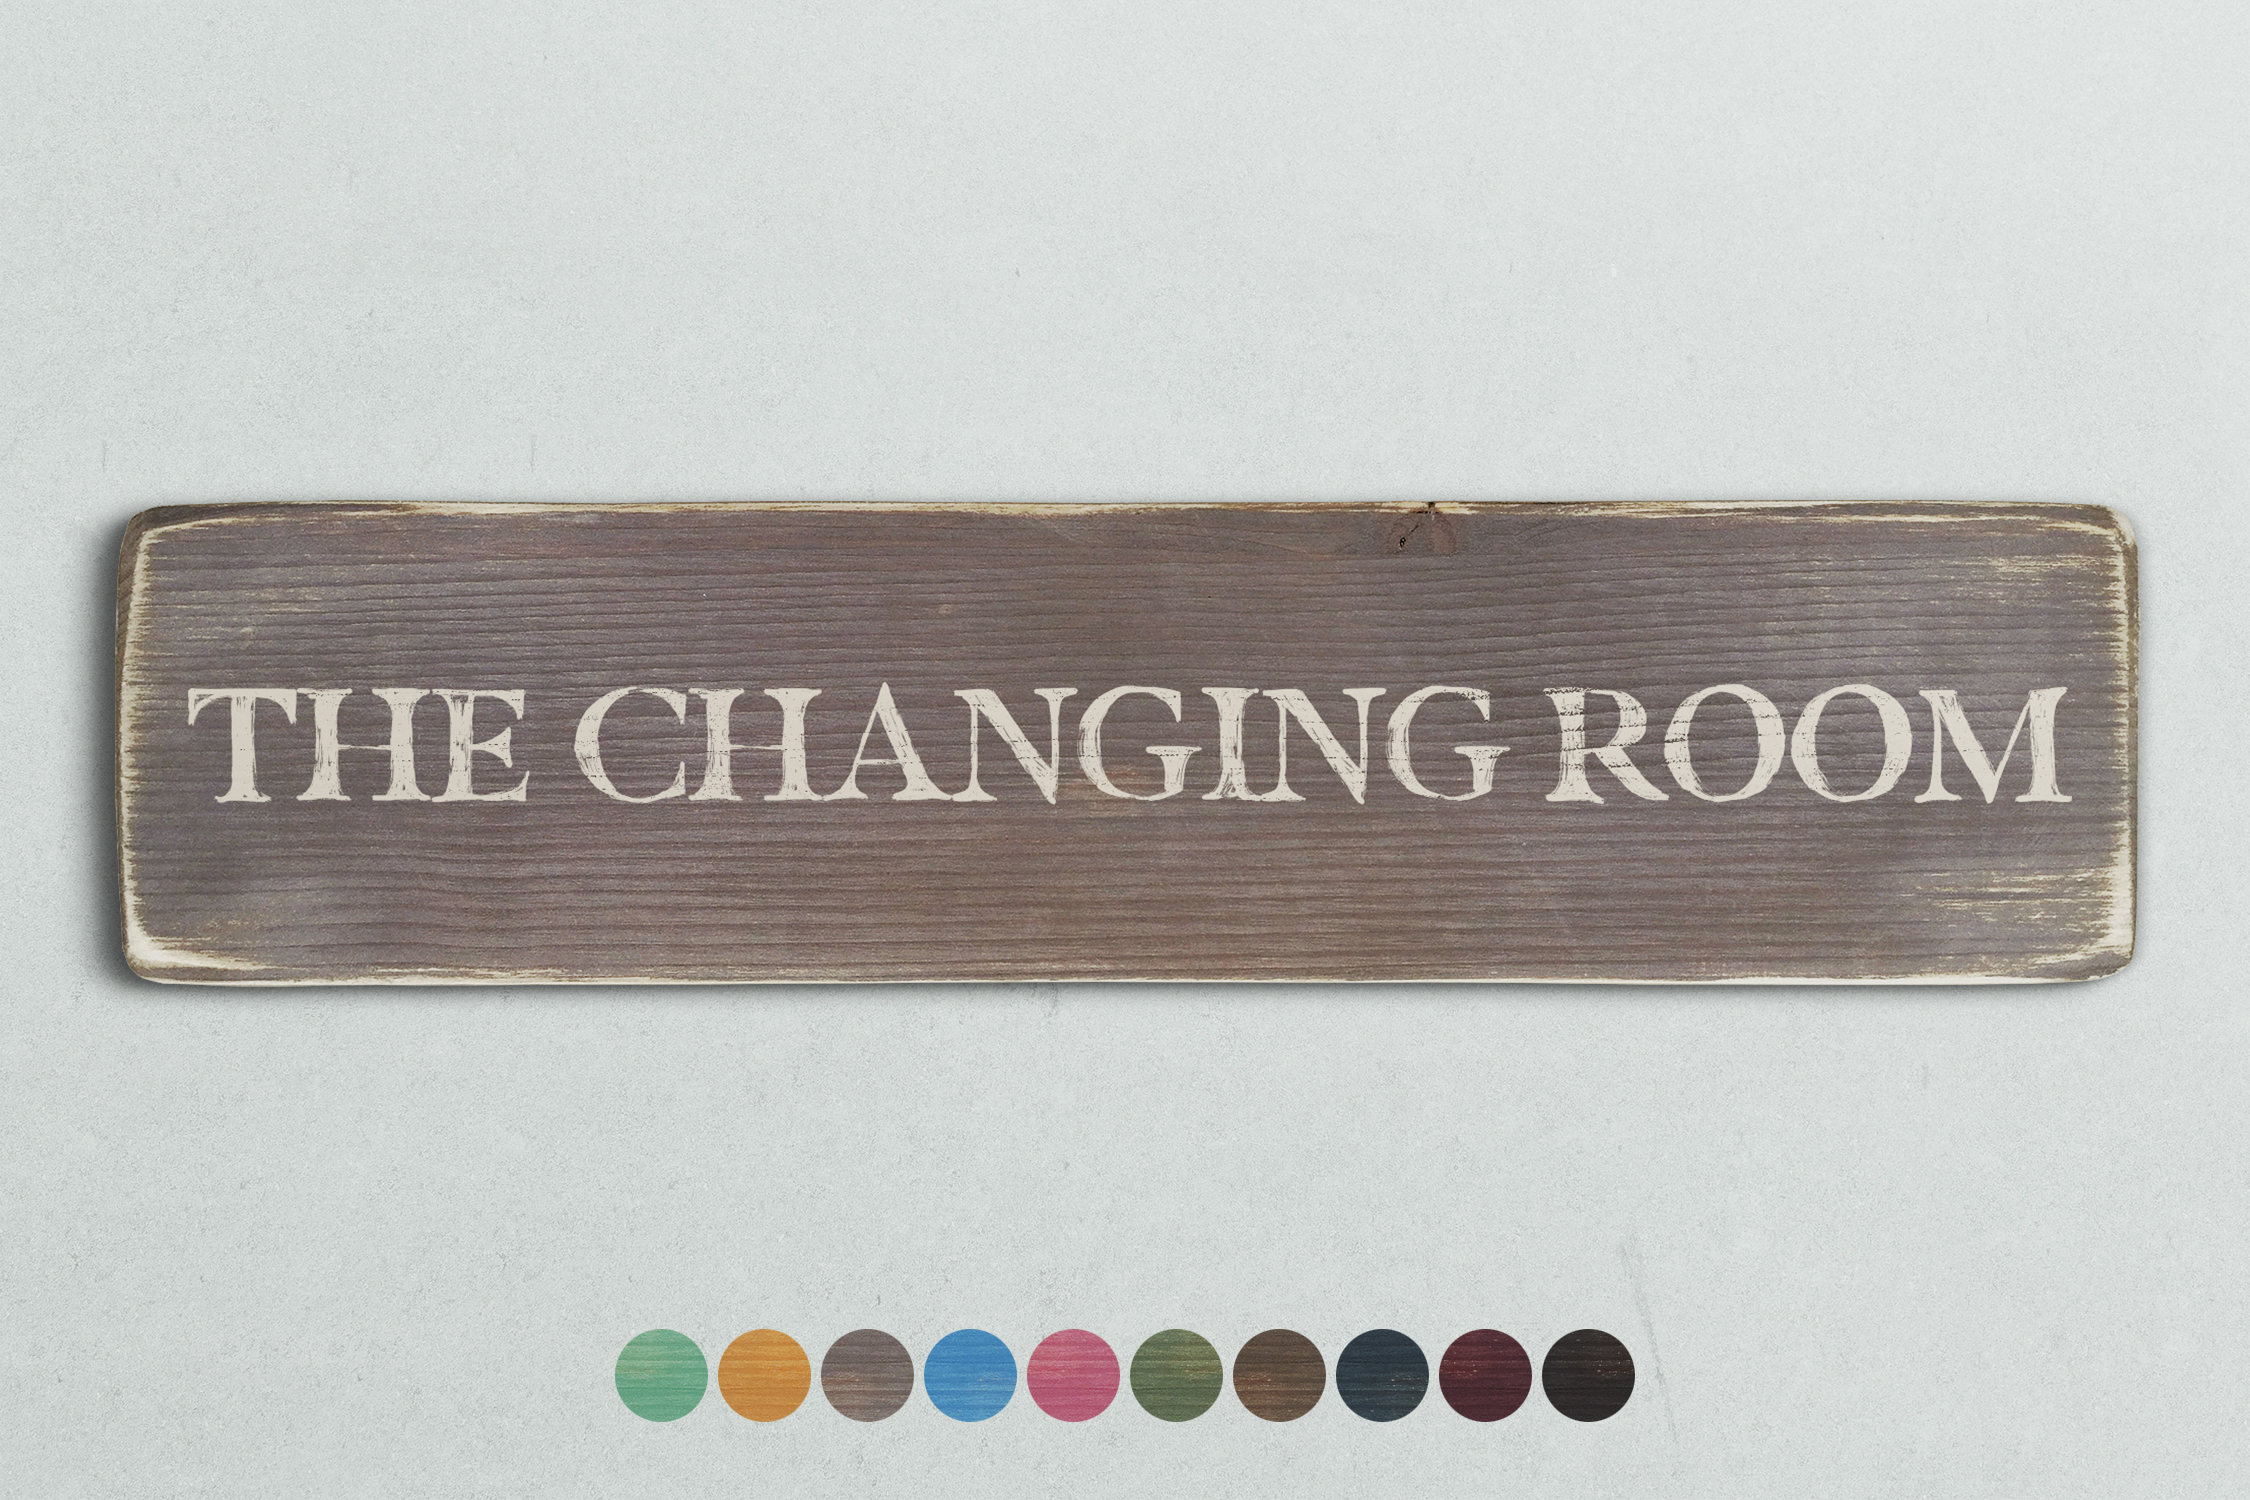 CHANGING ROOM Vintage Style Wooden Sign Shabby Chic Retro Home Gift